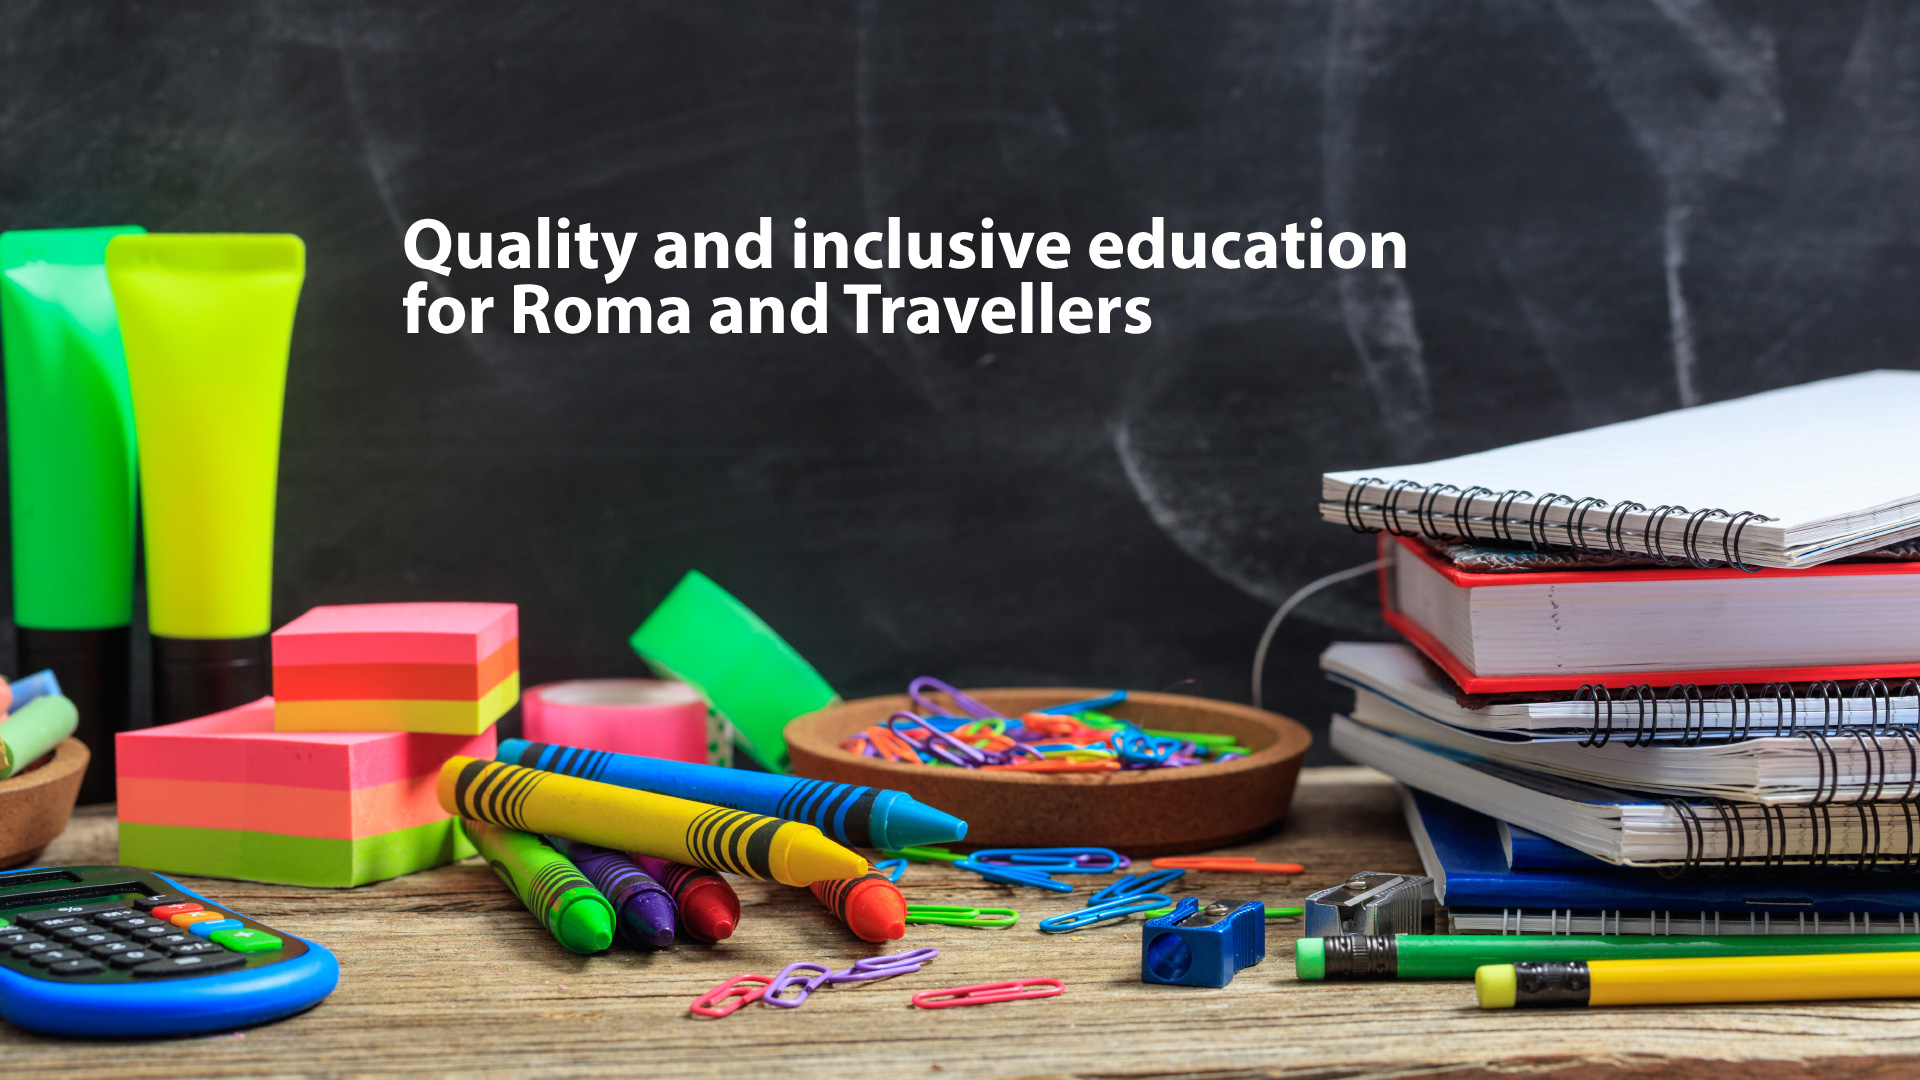 Call for consultancy services for developing a position paper on quality and inclusive education for Roma and Travellers